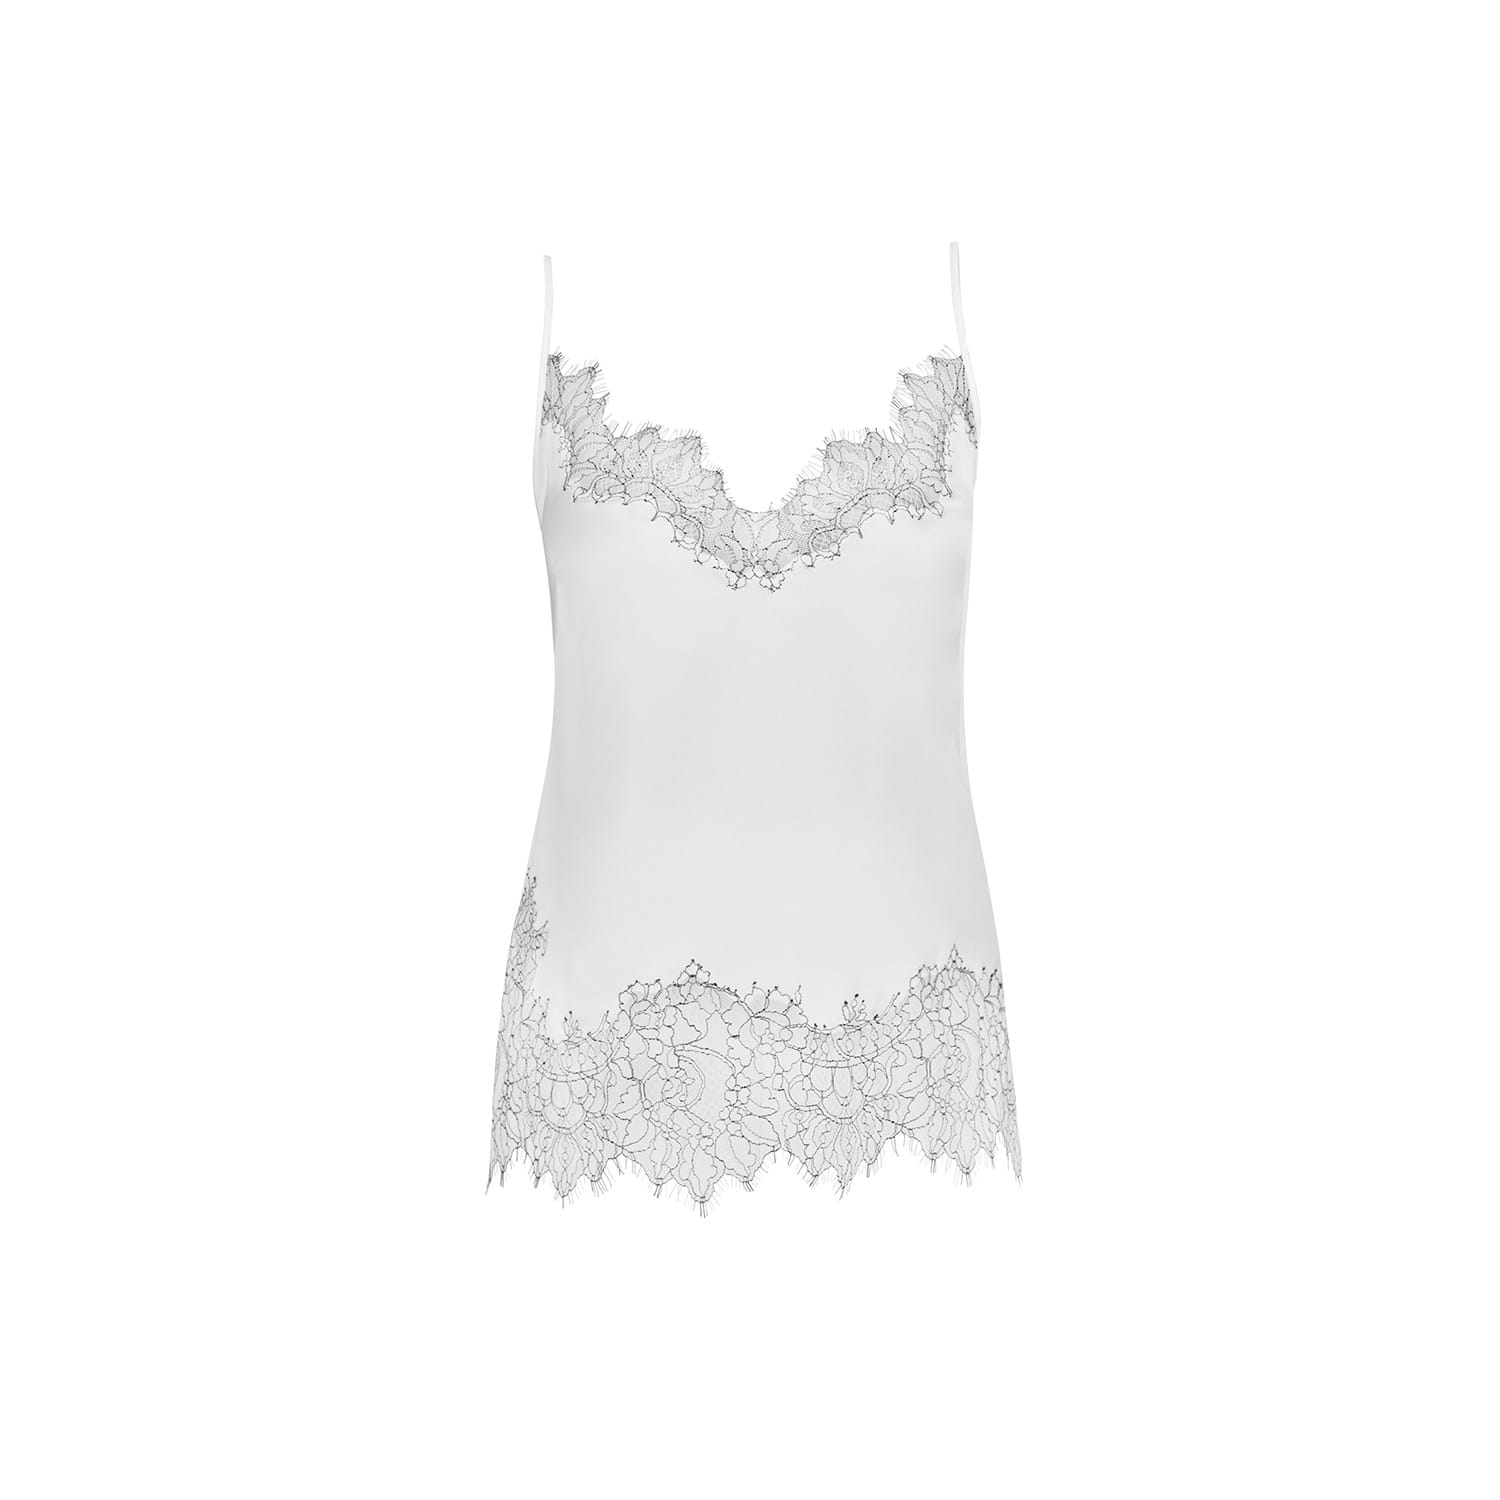 Silk Camisole - Black and Black Caudry Lace